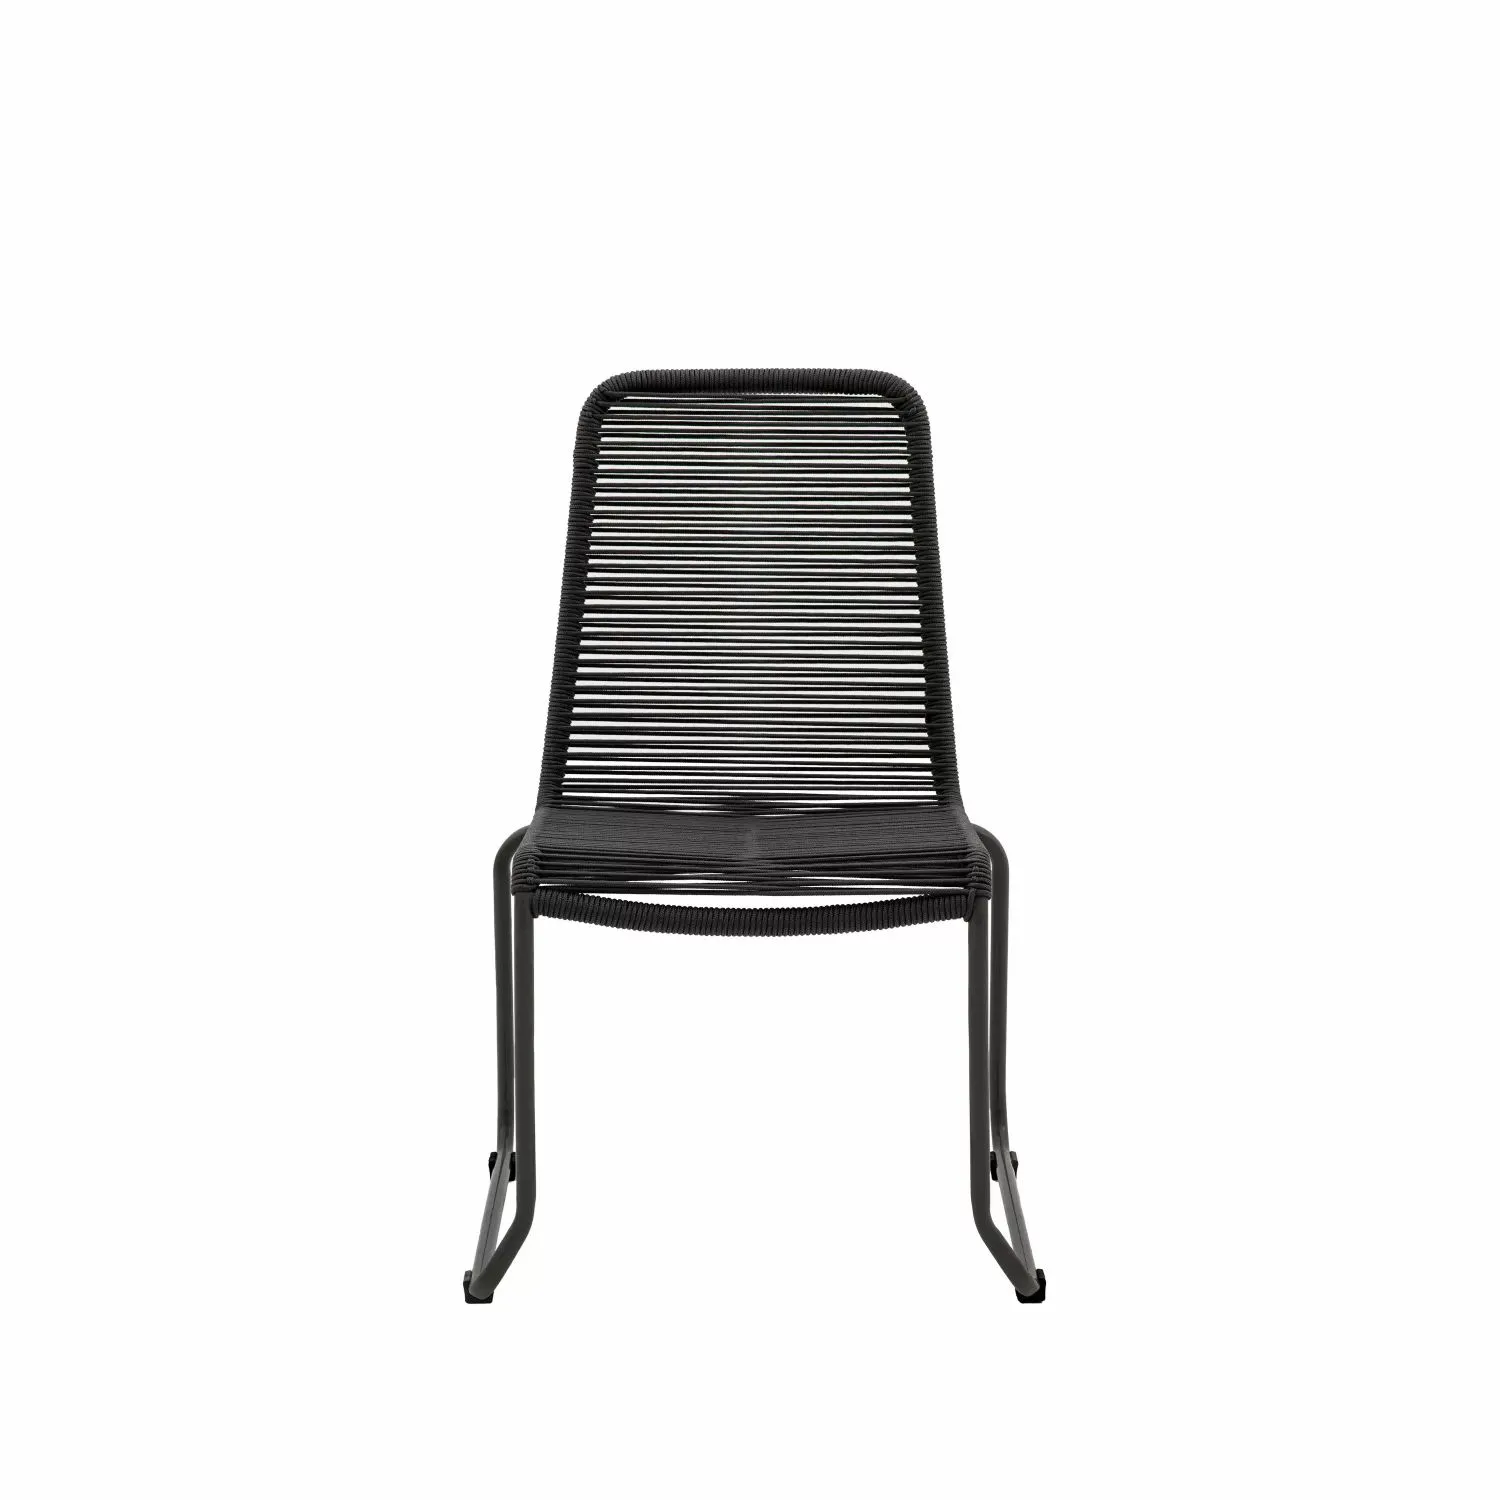 Farmhouse Metal Dining Chair Black Woven Rope Seat